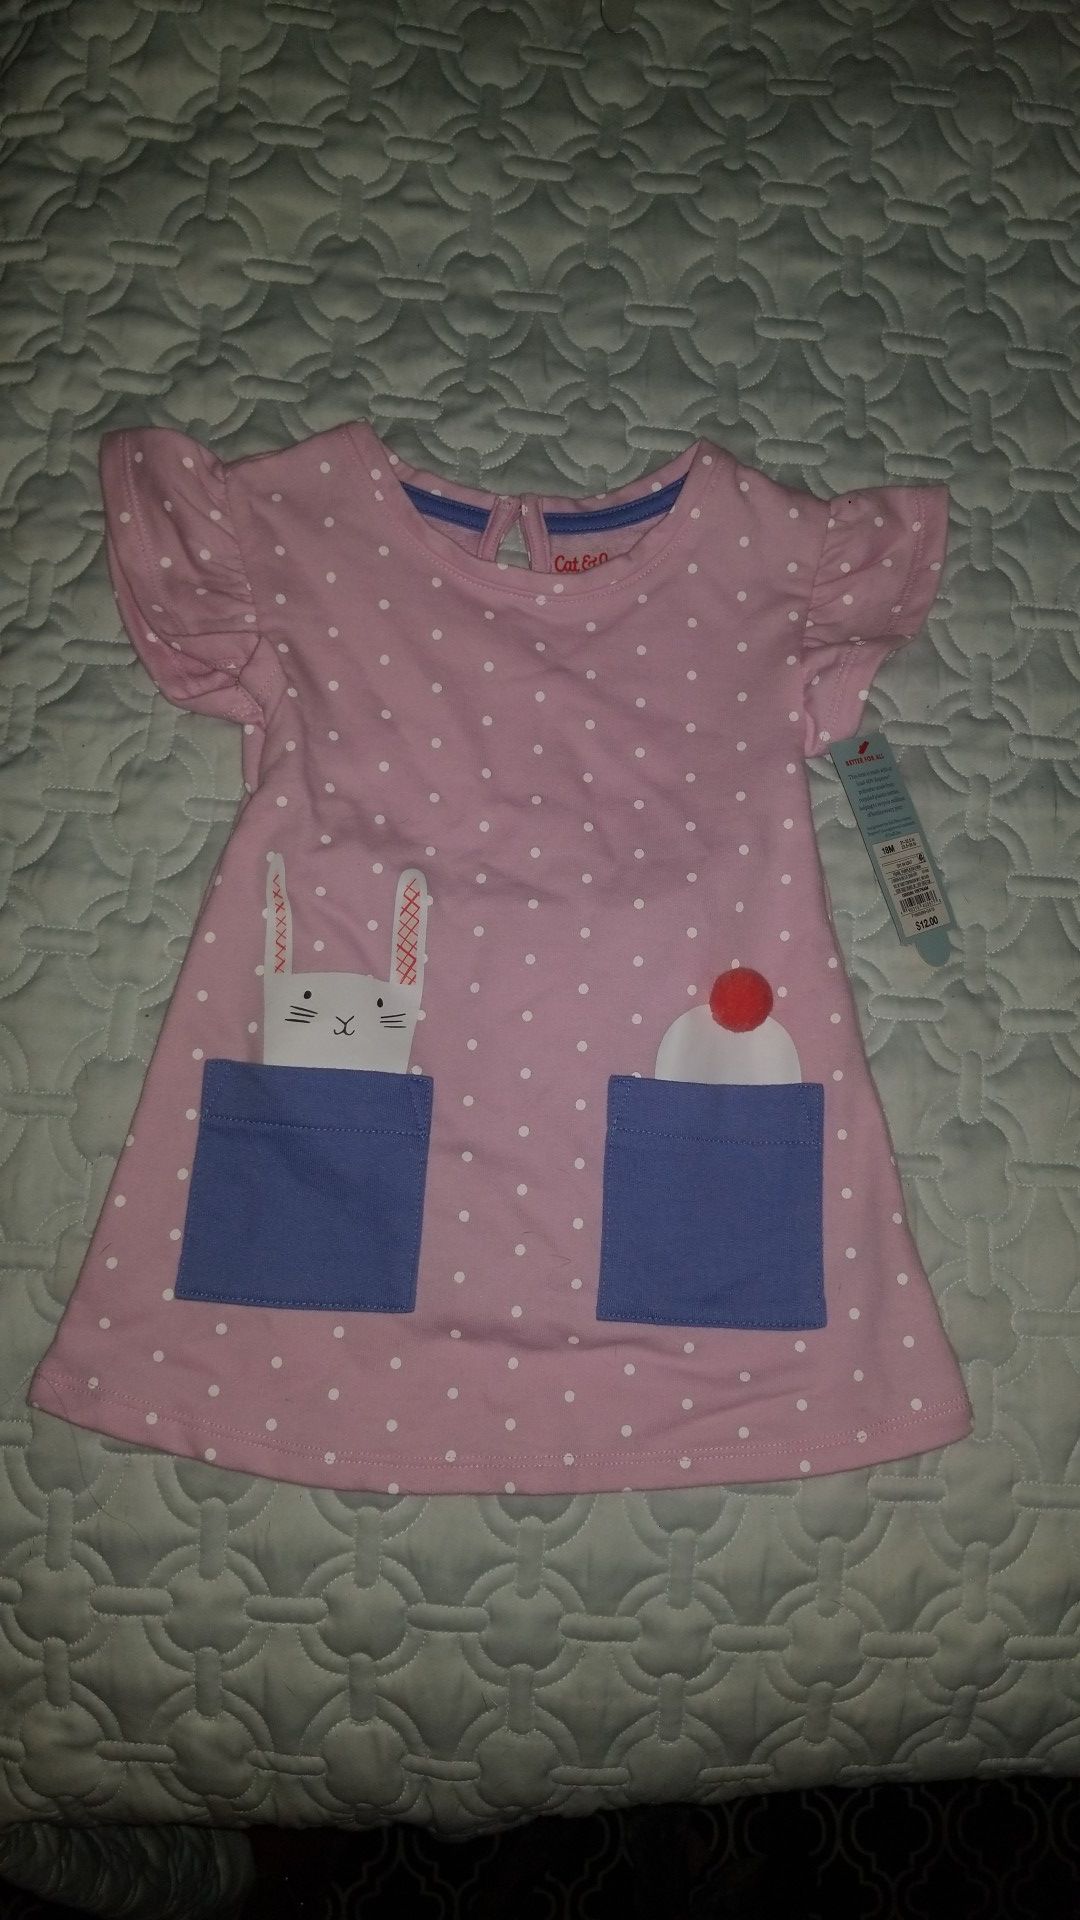 New size 18M Cat & Jack bunny rabbit flutter sleeve dress with pom pom tail 18 months nwt pink purple gift Easter